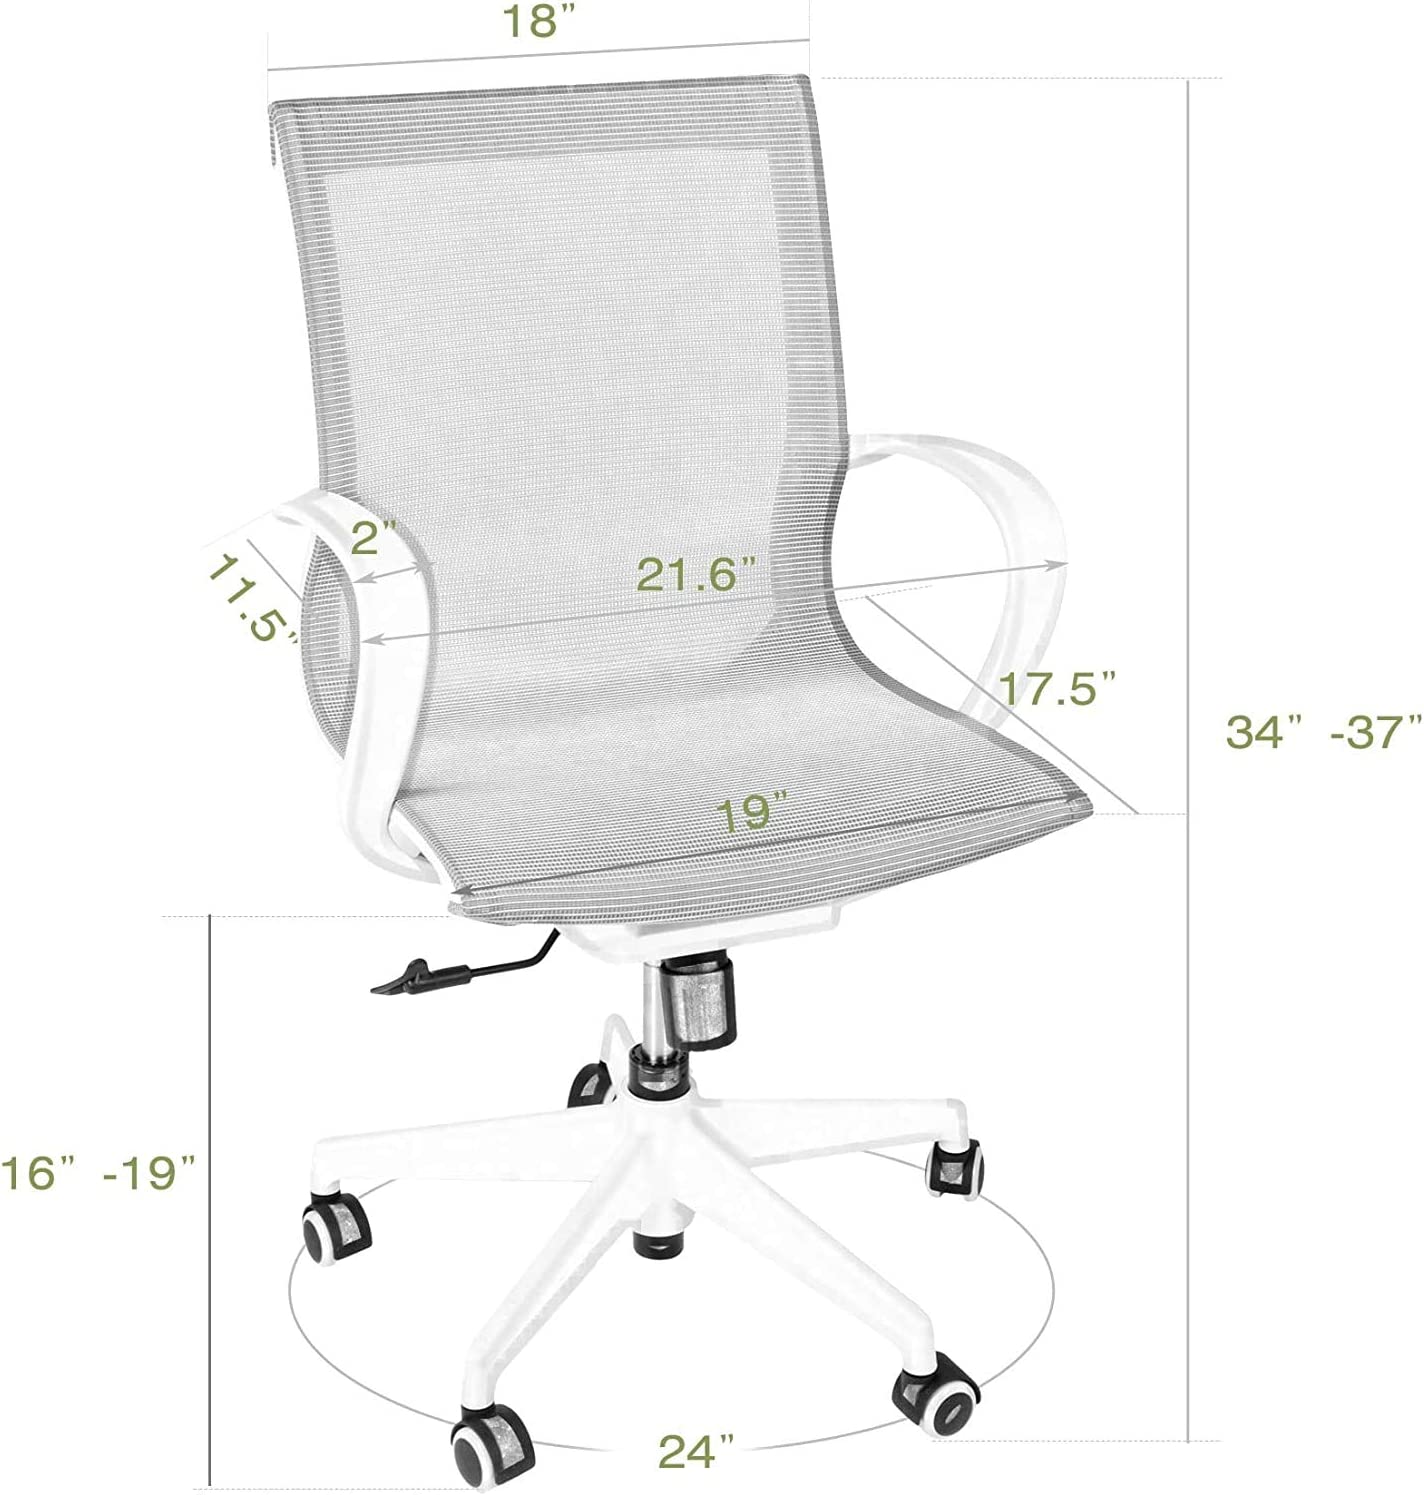 Office Mesh Chair Ergonomic Desk Chair with Armrest and 5 Swivel Casters